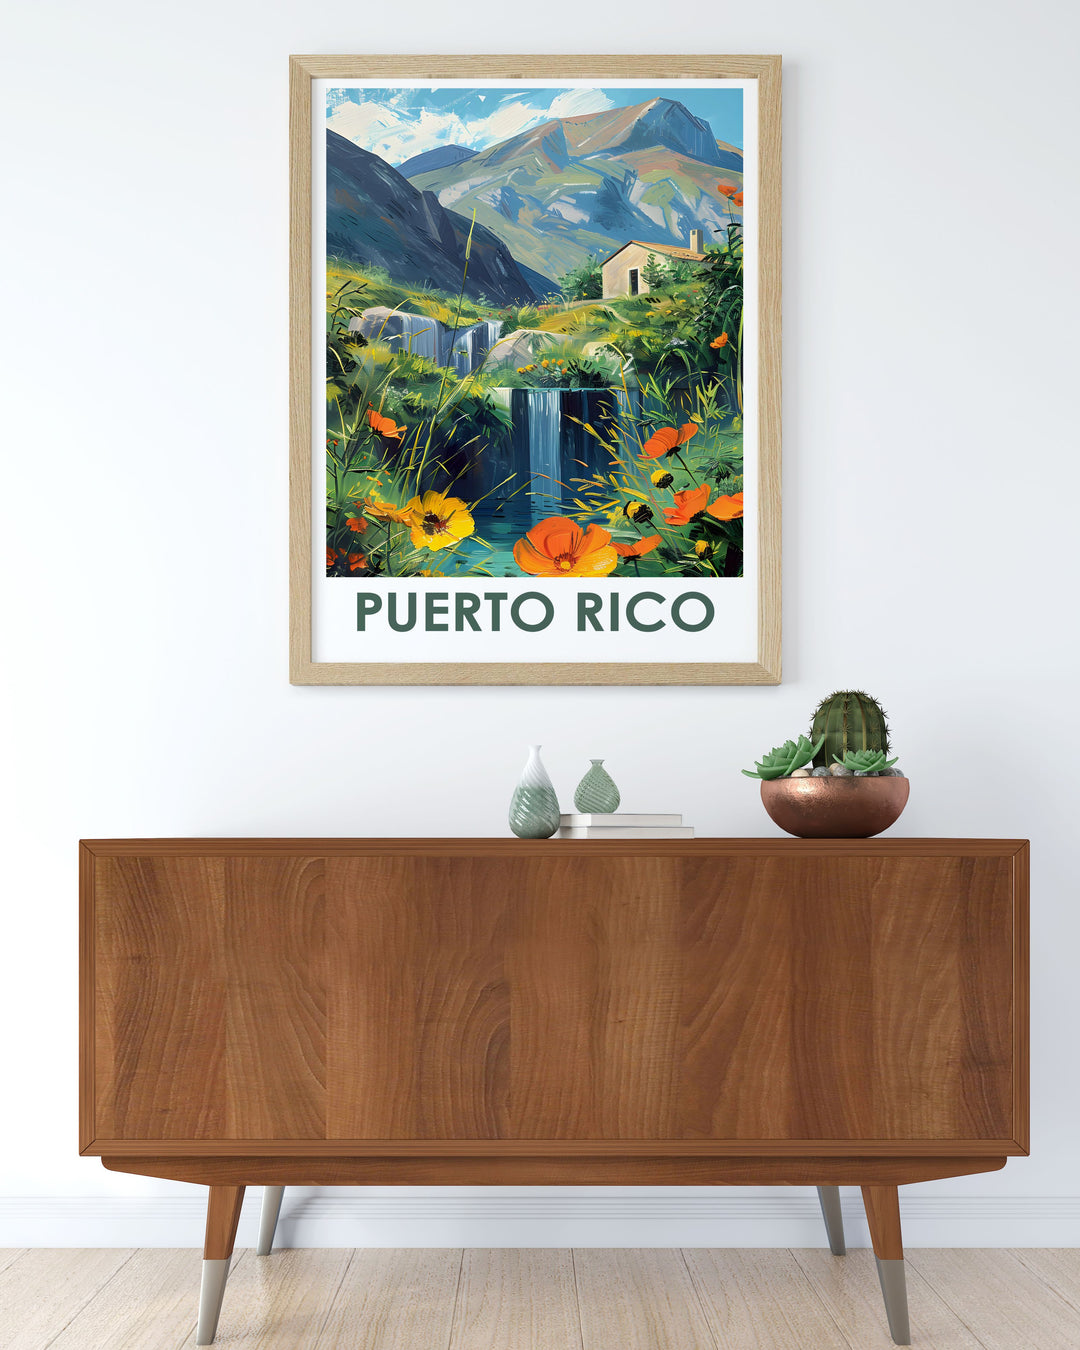 Beautiful Arecibo Wall Art showcasing El Yunque National Forest. This artwork captures the essence of Arecibo and the lush greenery of El Yunque, perfect for adding a touch of Puerto Ricos natural beauty to your home and as a special personalized gift.